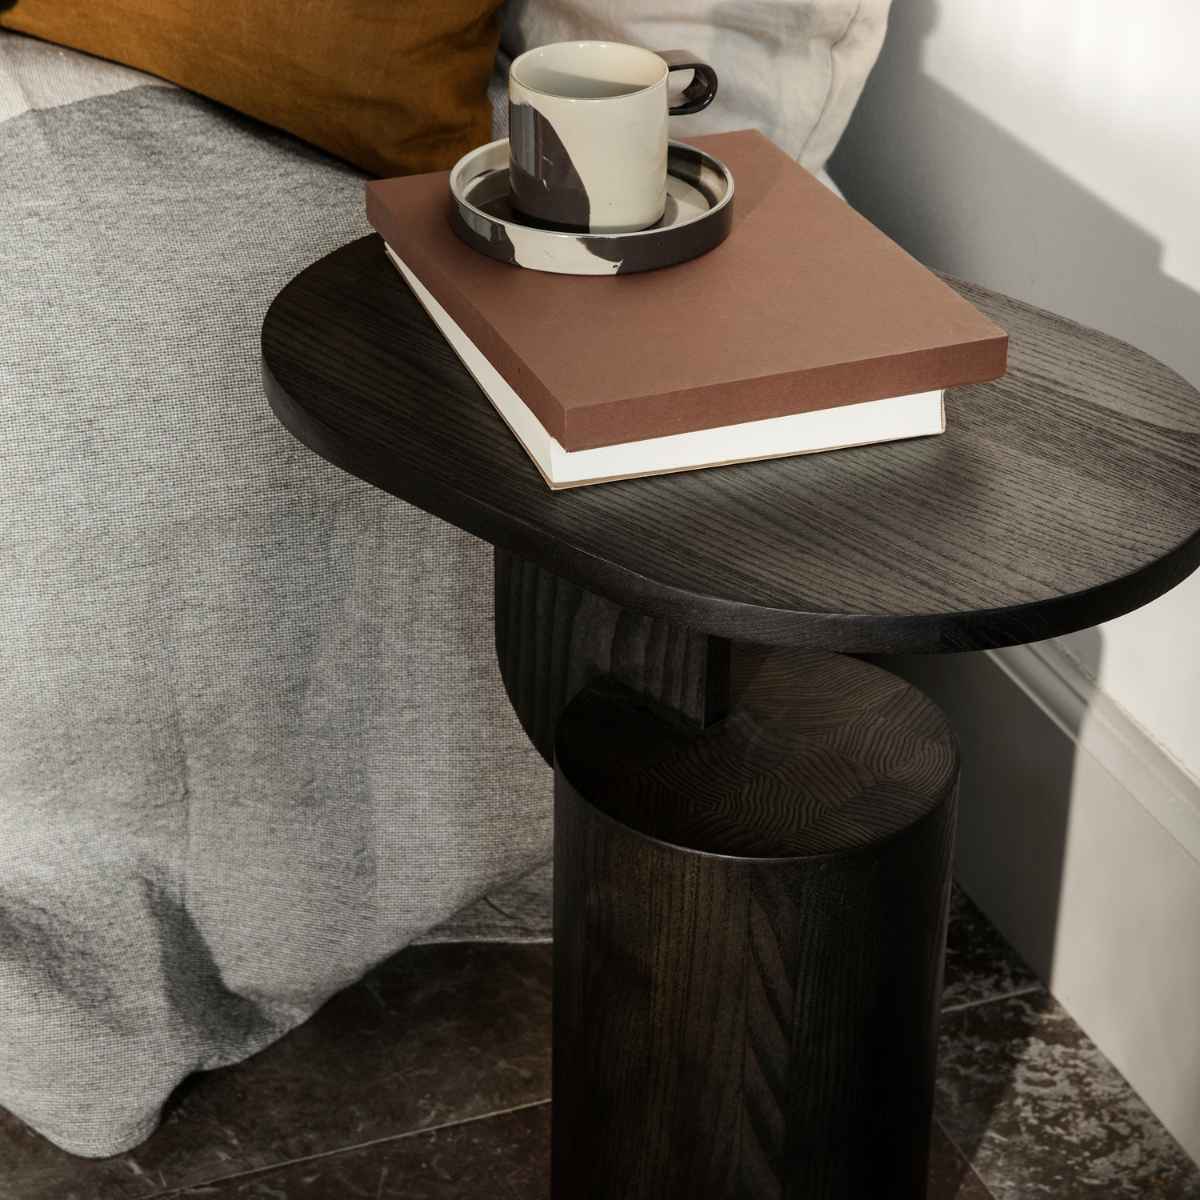 Insert Side Table Black Stained Ash - ferm LIVING